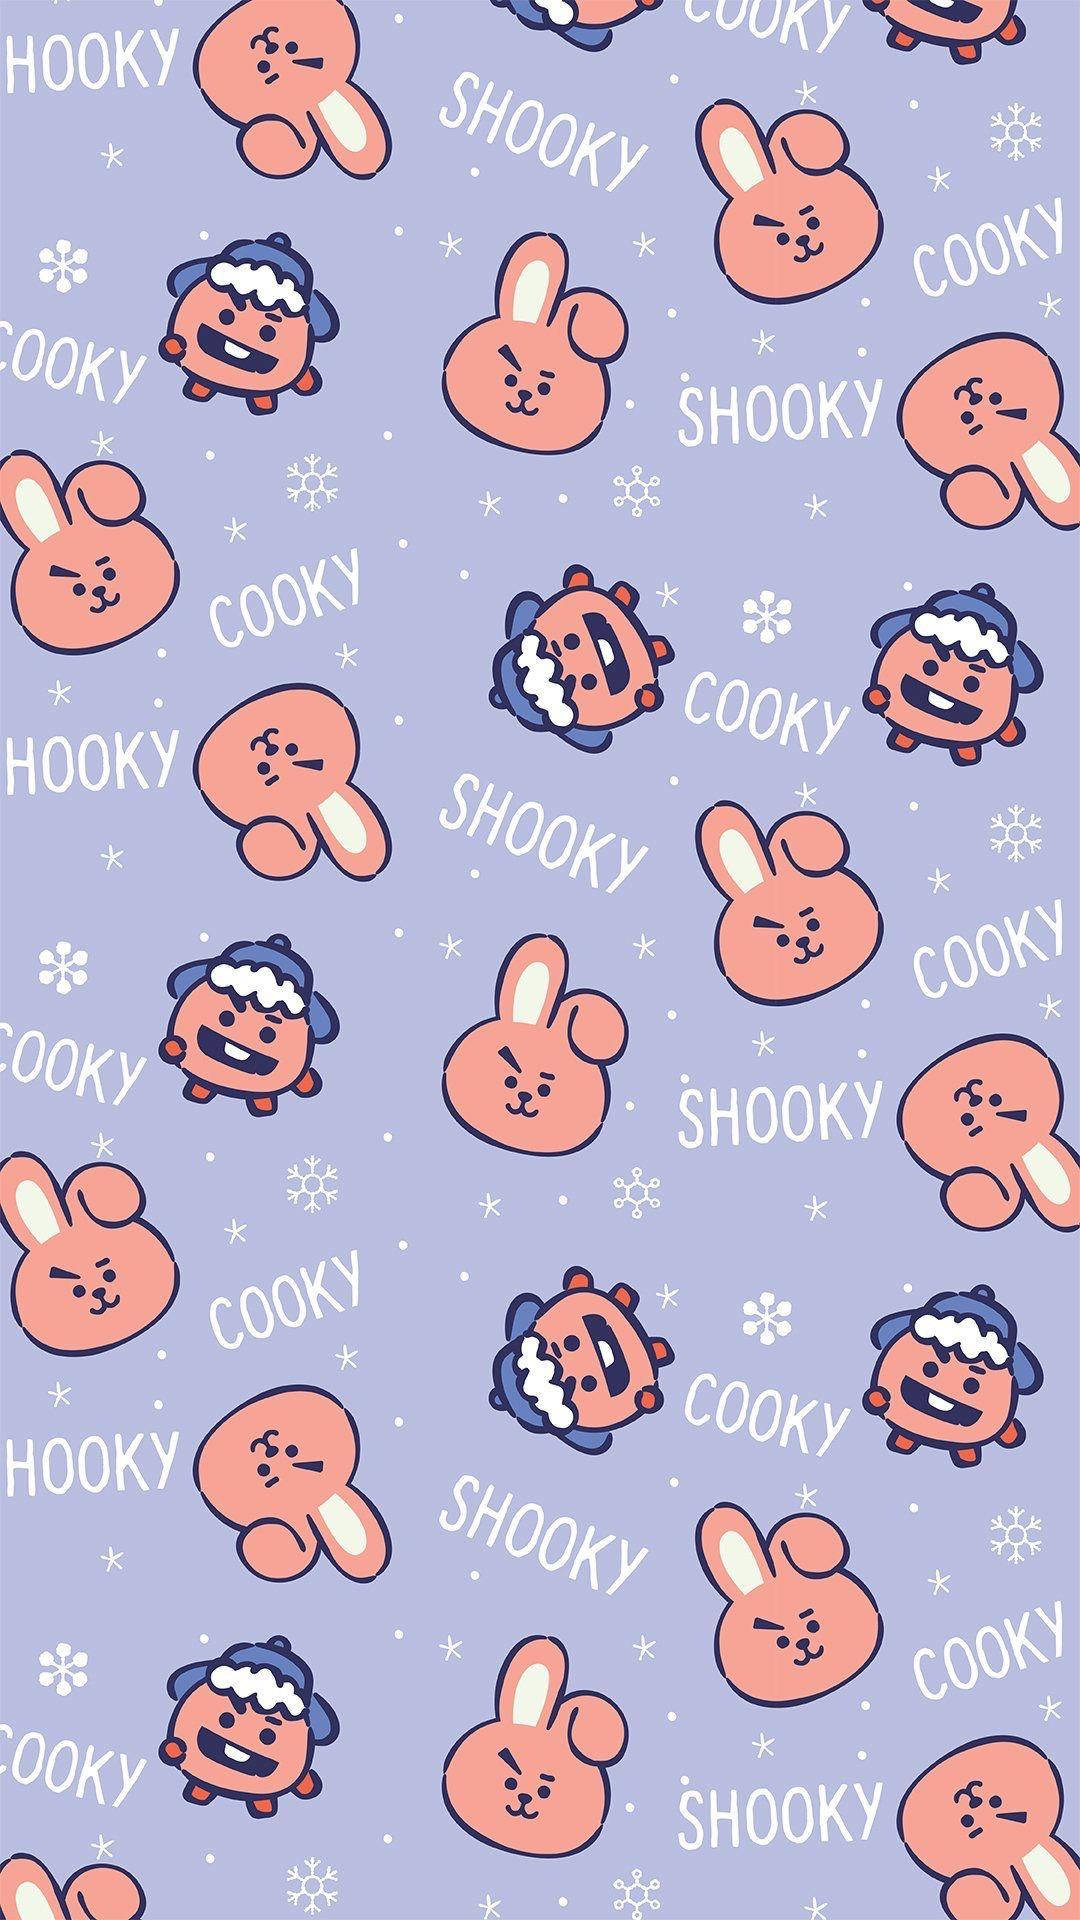 Cooky Bt21 With Shooky Poster Wallpaper